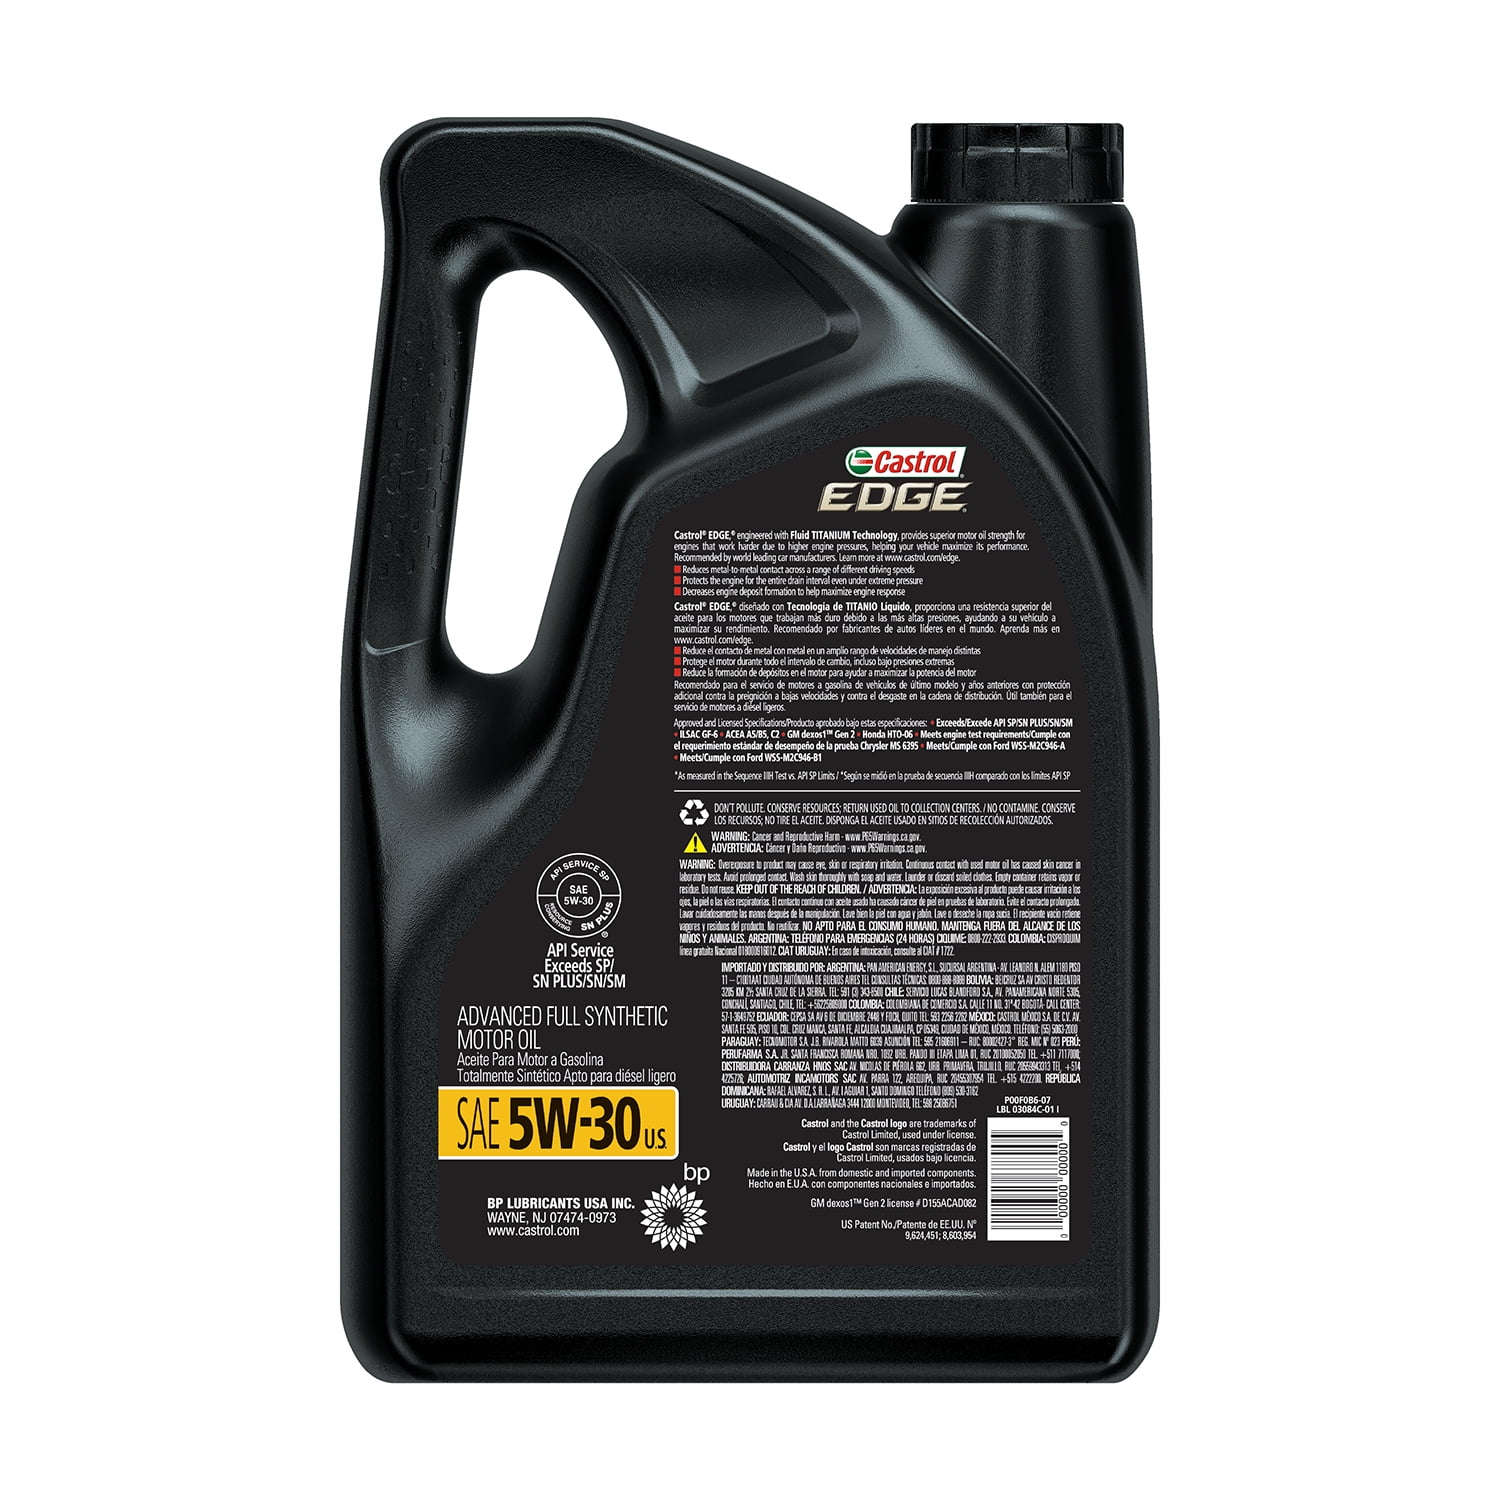 Гл 5 масло. Castrol 0w20. Performance engine Oil 5w-30. Daewoo 5w-30 fully Synthetic. Full Synthetic 0w-20 c5 4л.